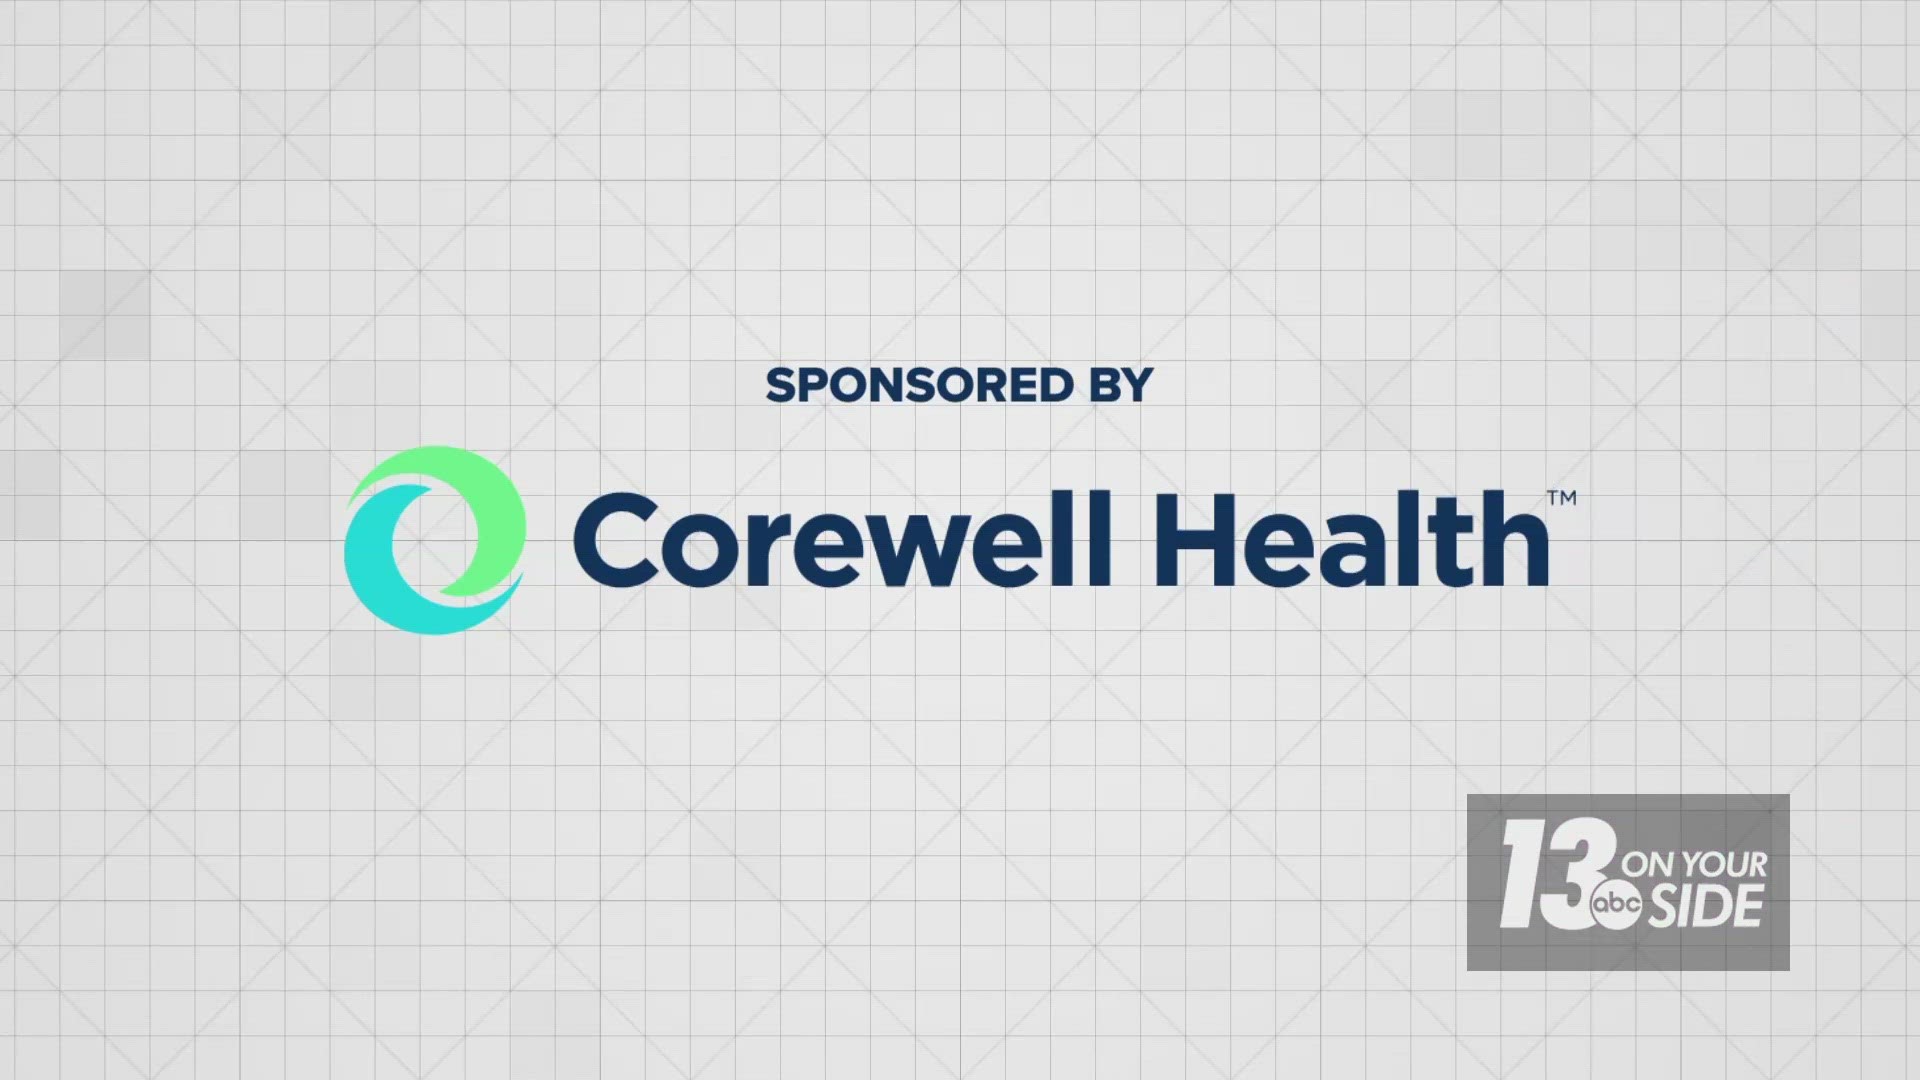 We wanted to know more about this first year of service, so we connected with two Corewell Health officials.